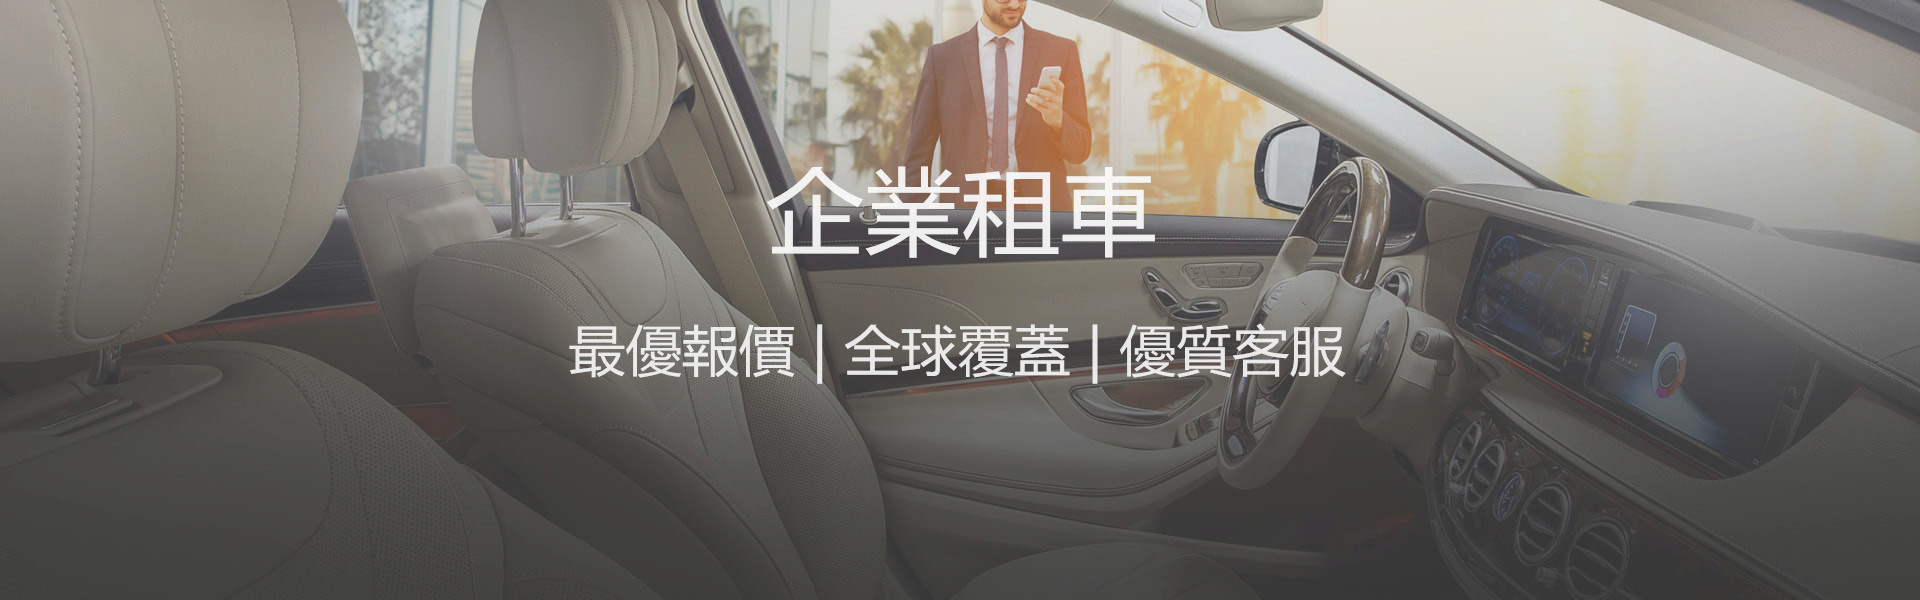 page/sixt.com-rent-a-car-for-business-hero-1_副本.jpg